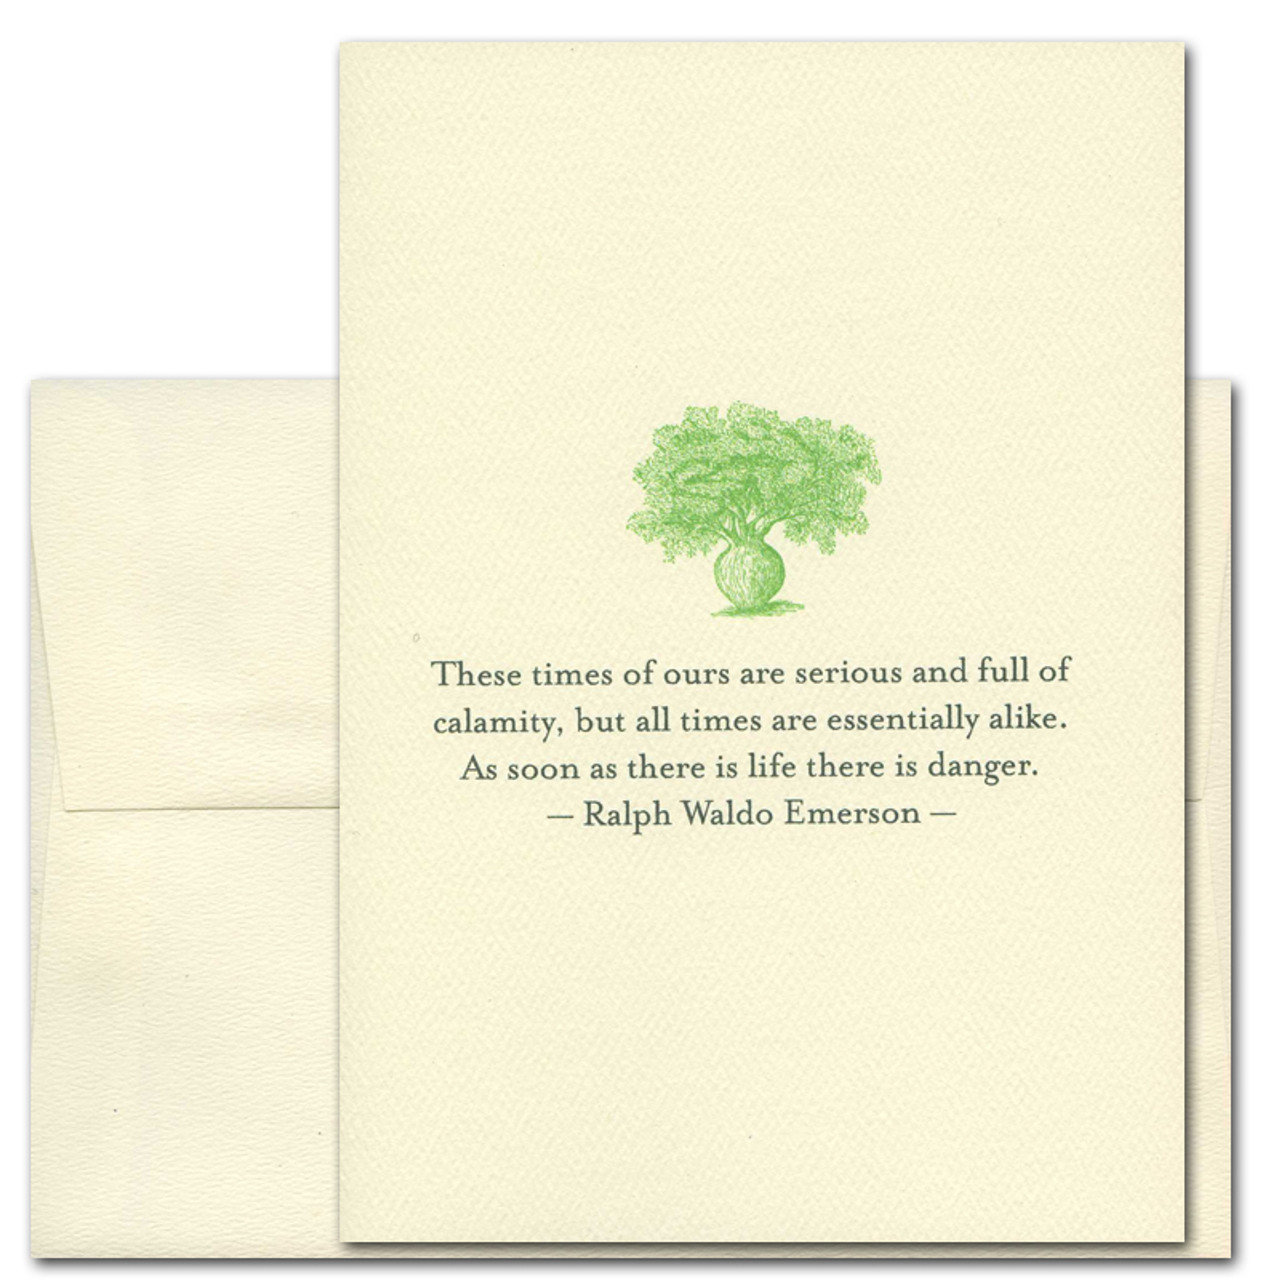 Emerson Quotation Card reads: These times of ours are serious and full of calamity, but all times are essentially alike. As soon as there is life there is danger. -Ralph Waldo Emerson